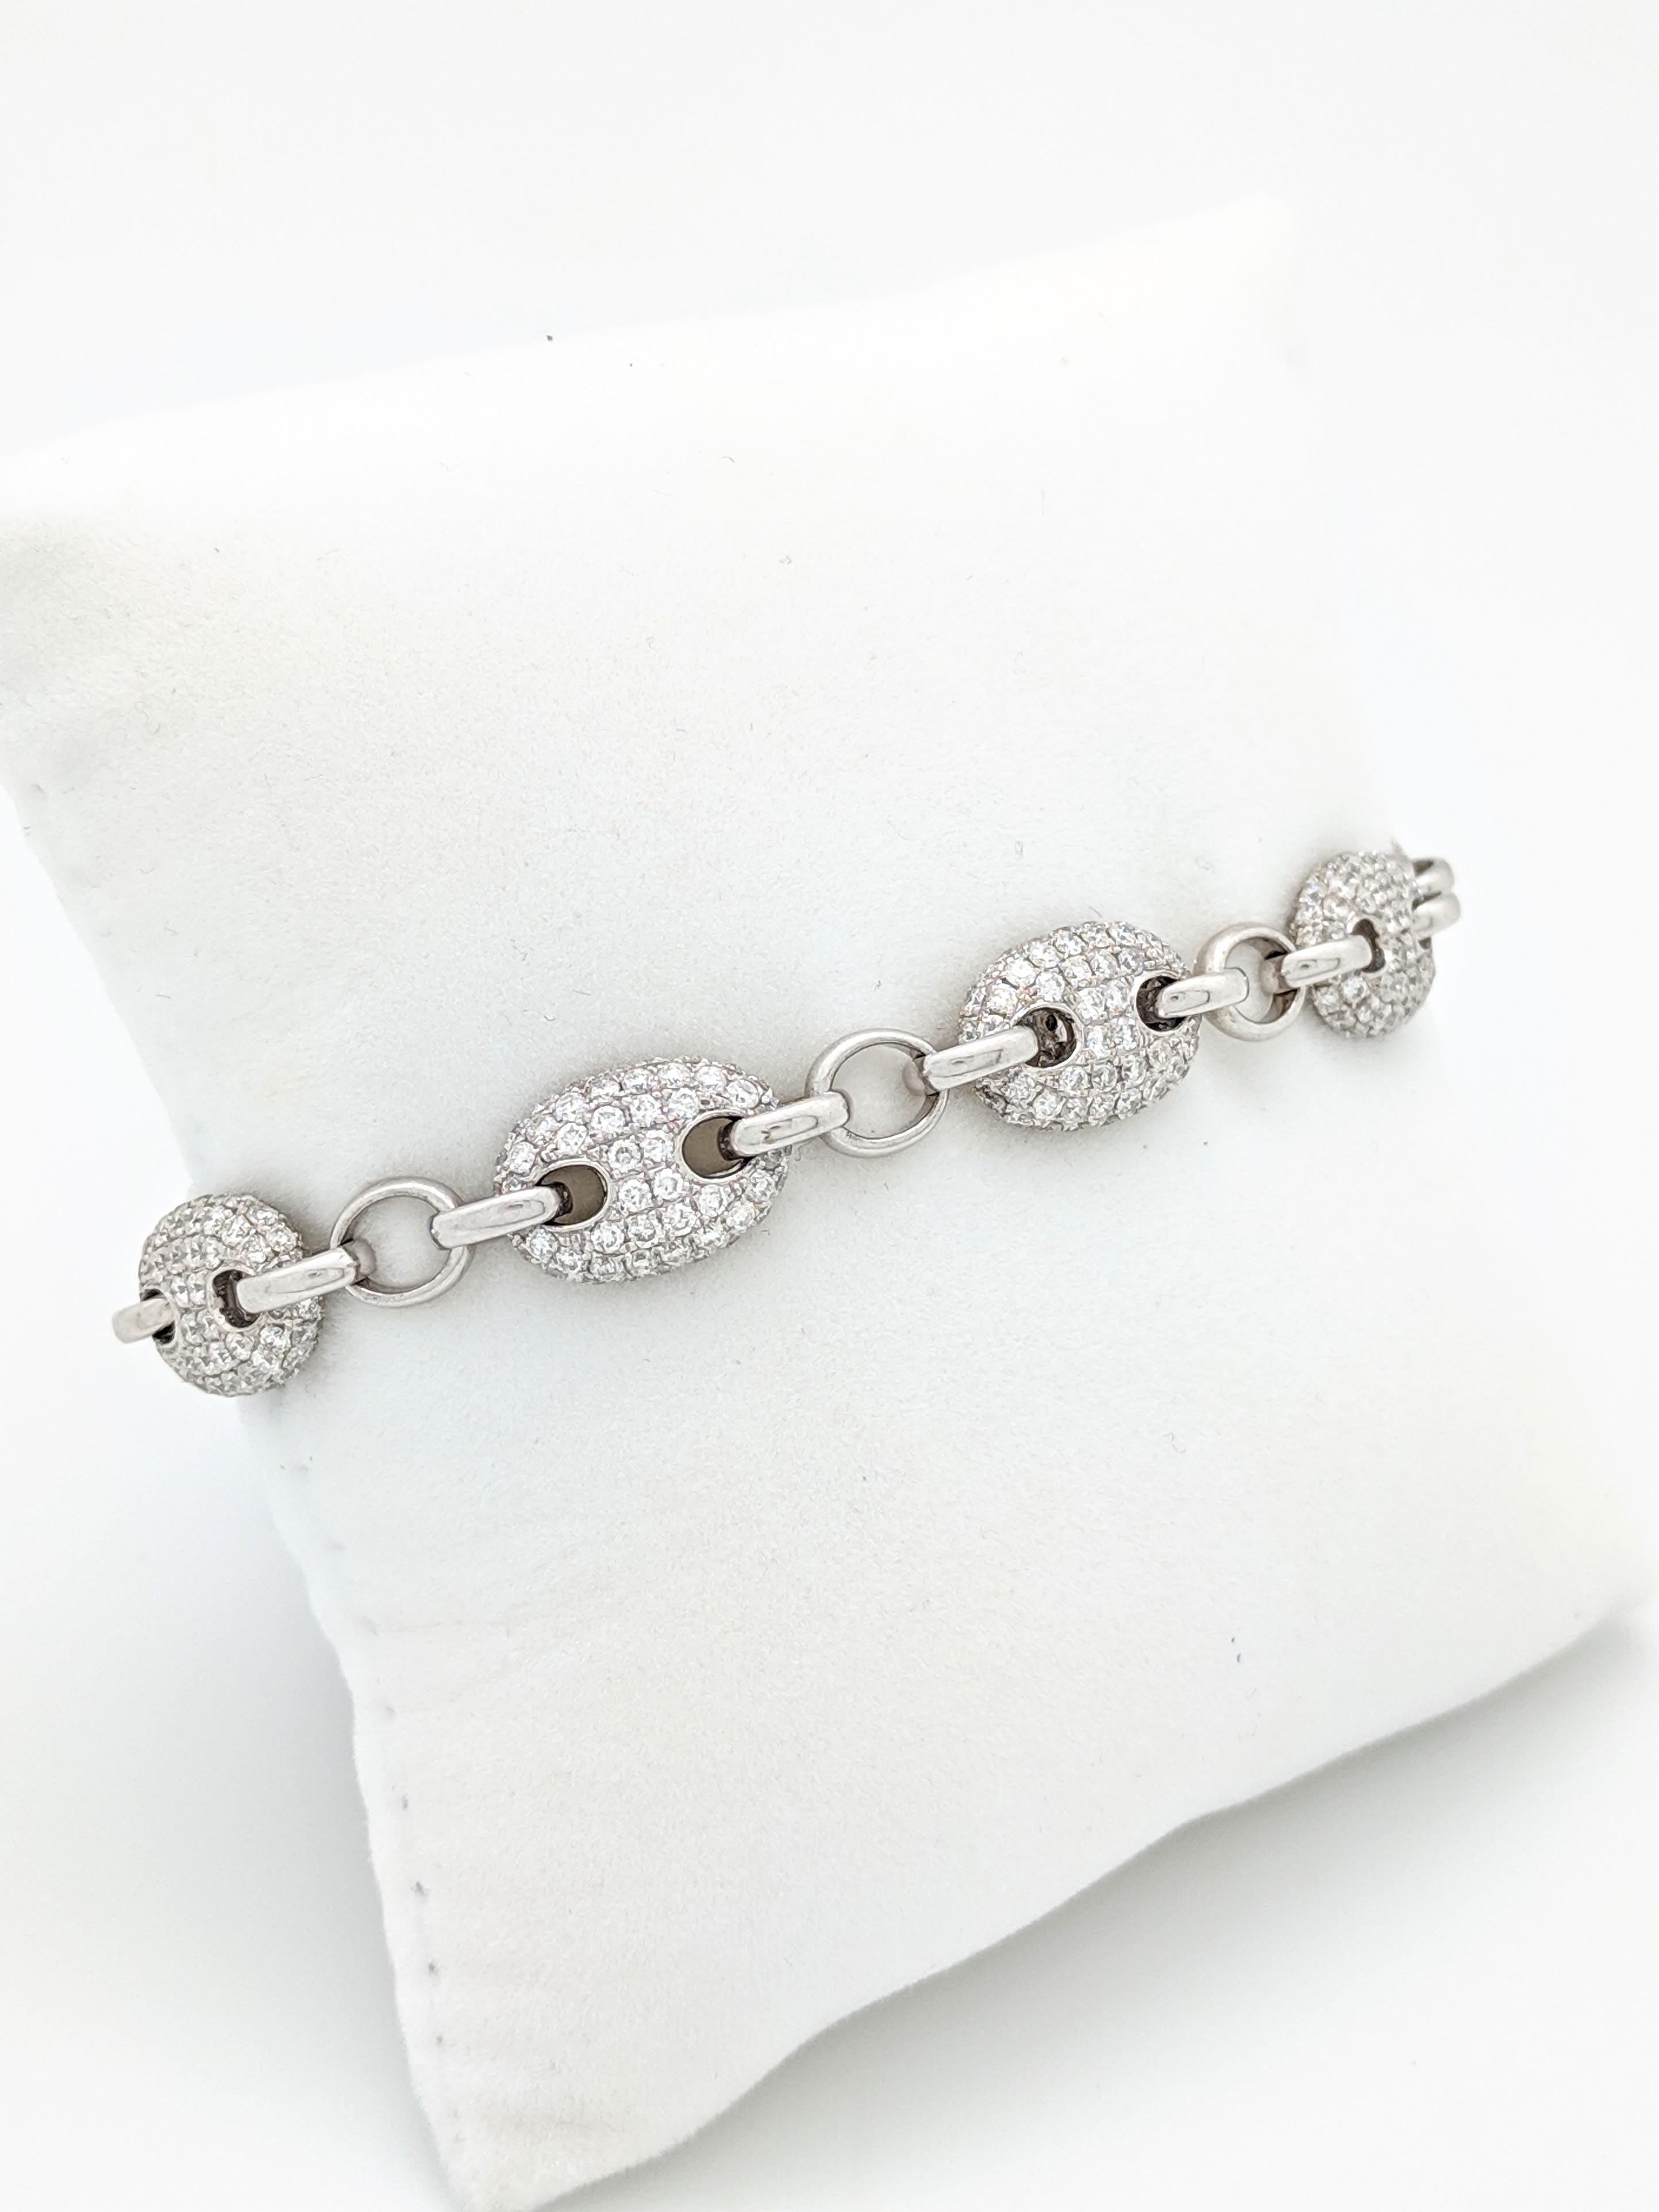 18k White Gold 6.88tcw Gucci Link Diamond Tennis Bracelet

You are viewing a Beautiful Diamond Tennis Bracelet that is sure to make a statement!

The bracelet is crafted from 18k white gold, measures 9mm in width and weighs 17.9 grams. It features